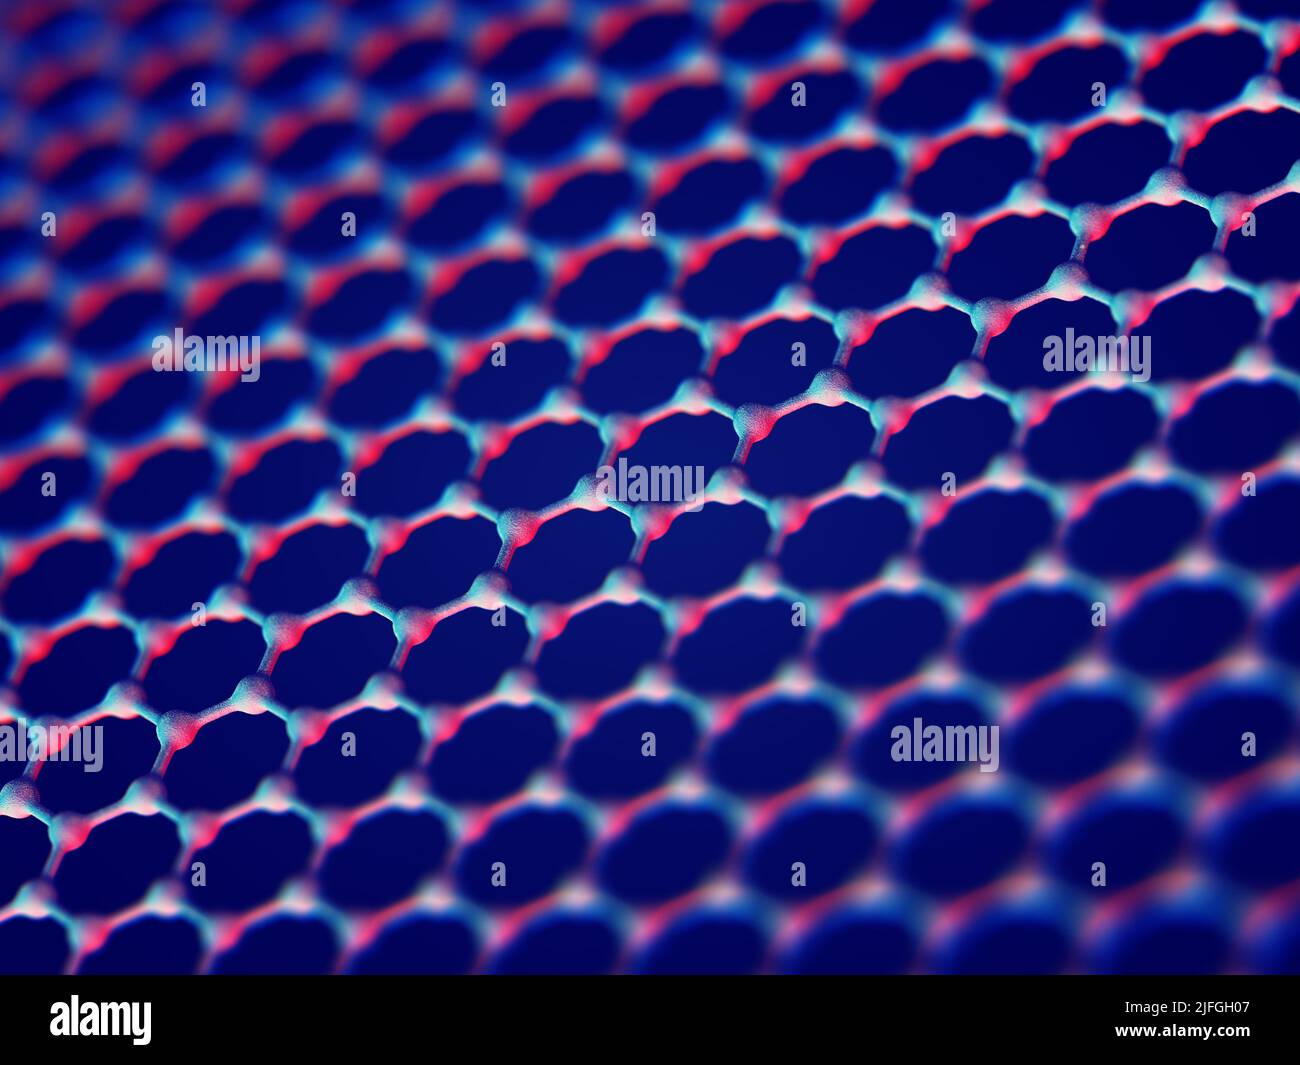 Graphene-based nanomaterials (GBN) concept. Graphene and Nanotechnology research Stock Photo